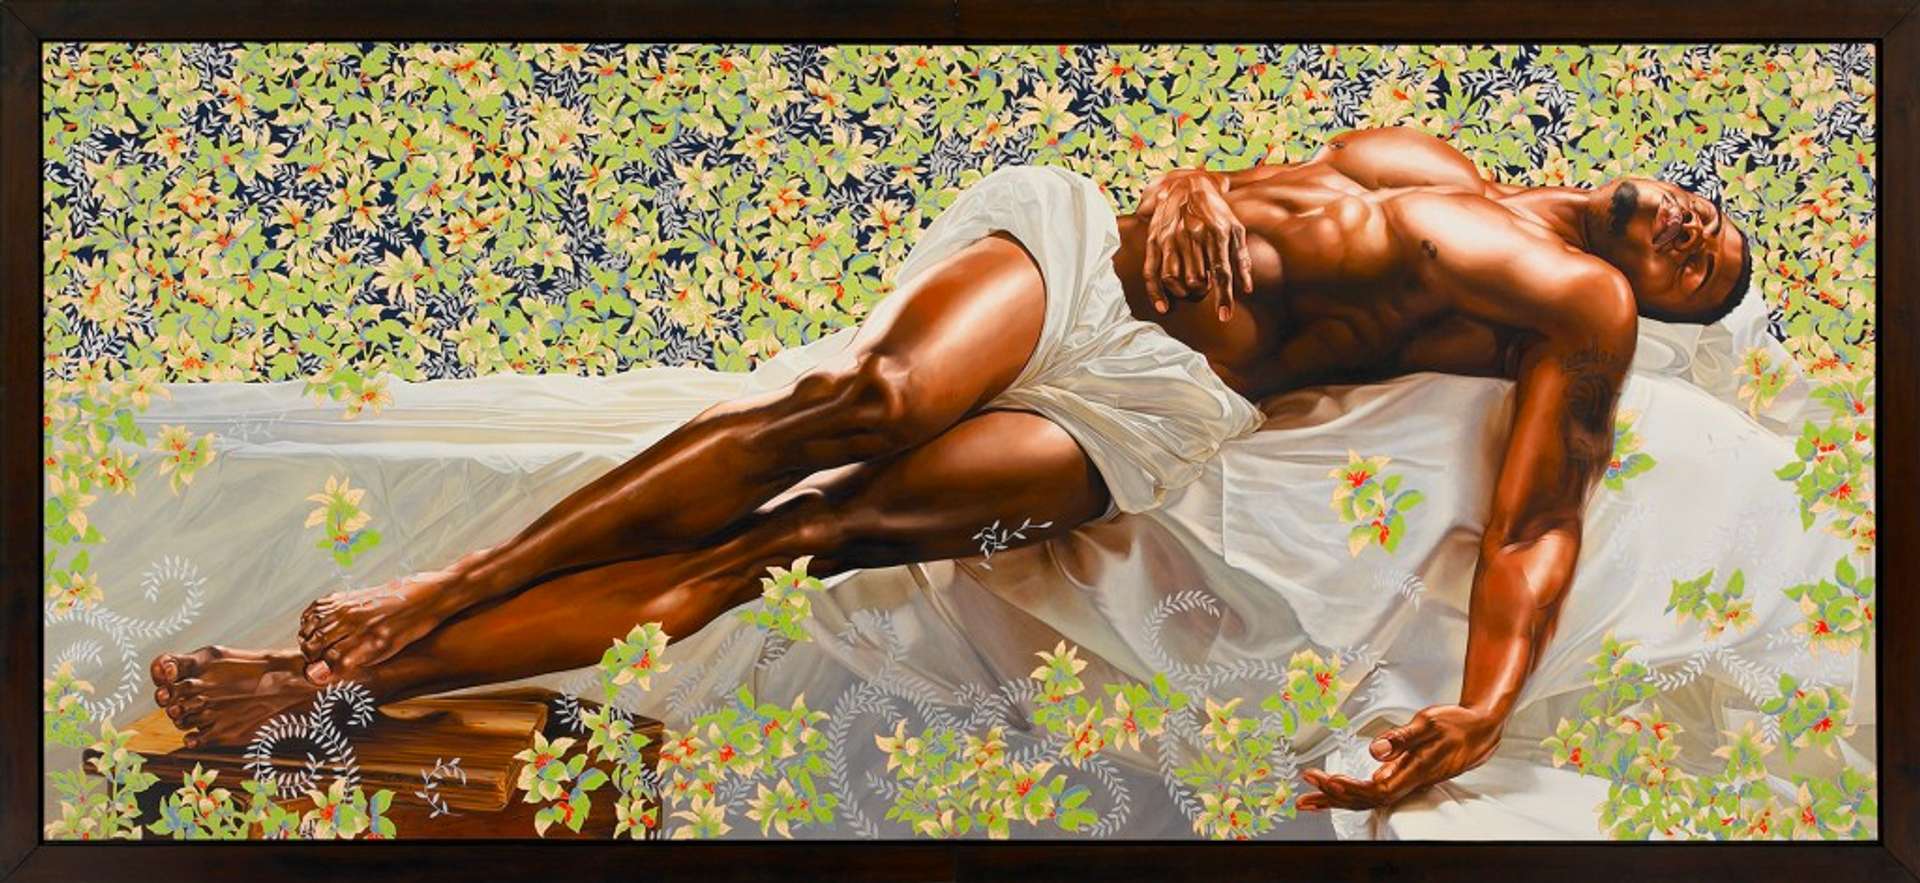 From South Central To The White House: Kehinde Wiley's Inspiring Artistic Journey